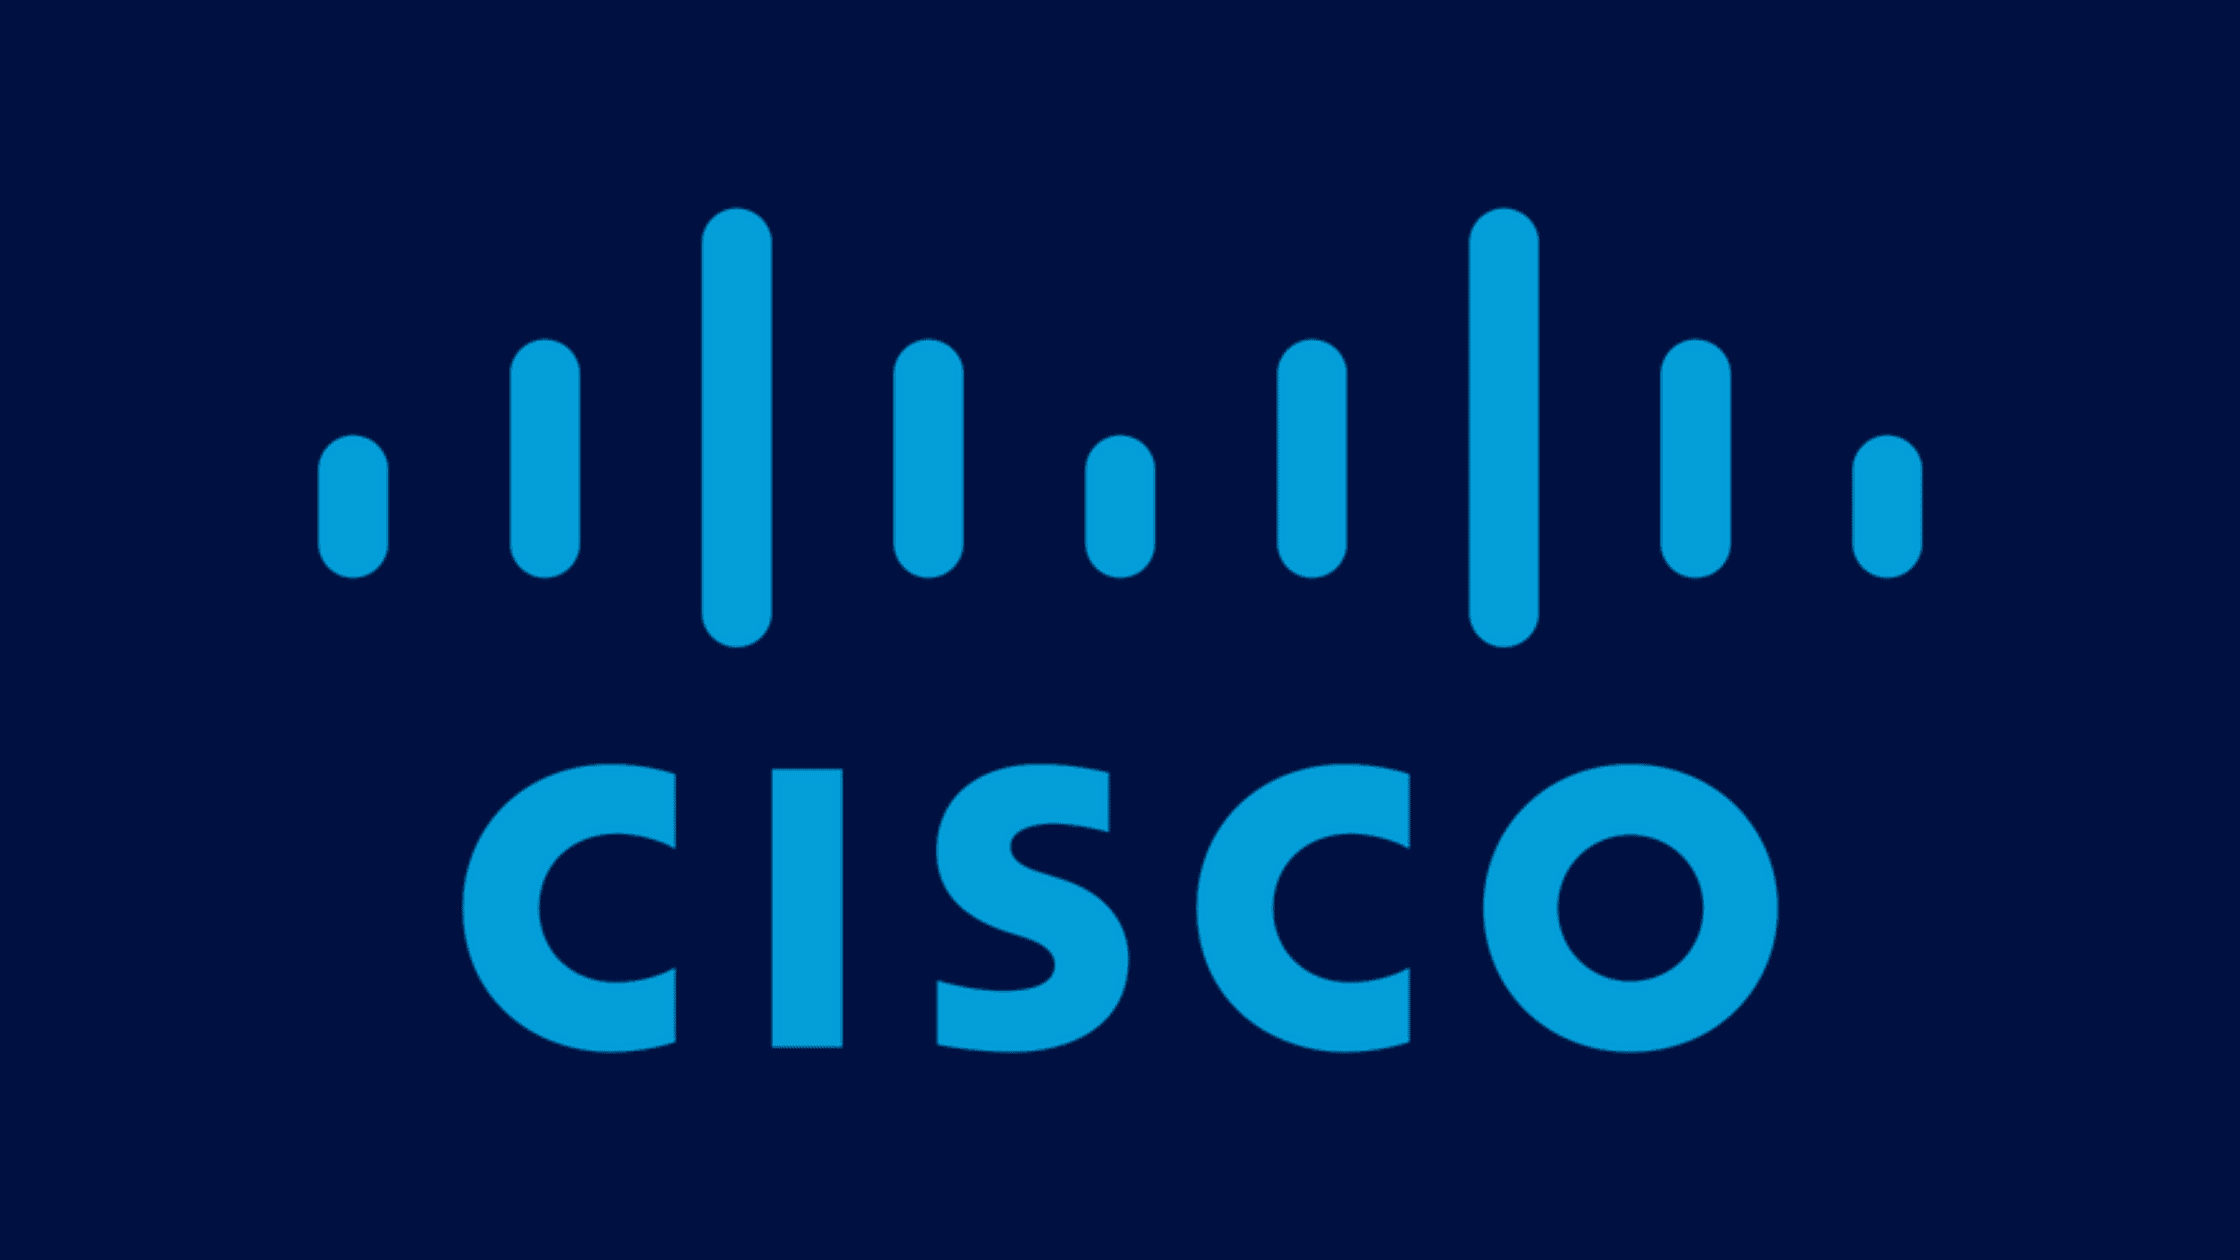 How To Fix Cve 2022 20798 An Authentication Bypass Vulnerability In Cisco Esa And Cisco Sma